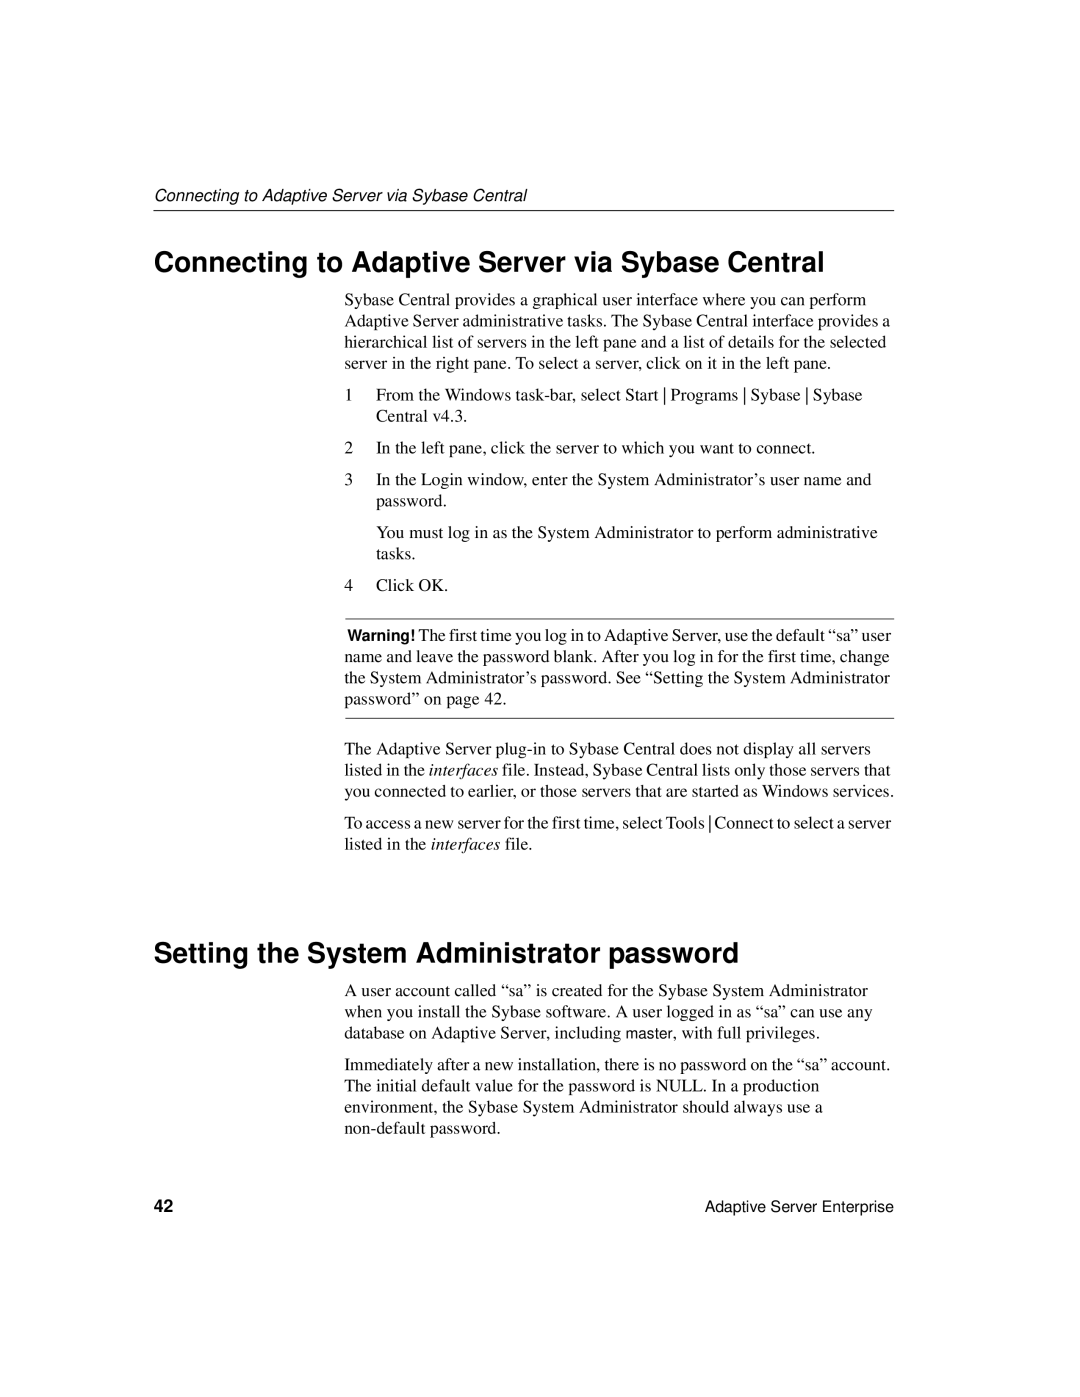 Sybase 15.0.2 manual Connecting to Adaptive Server via Sybase Central, Setting the System Administrator password 